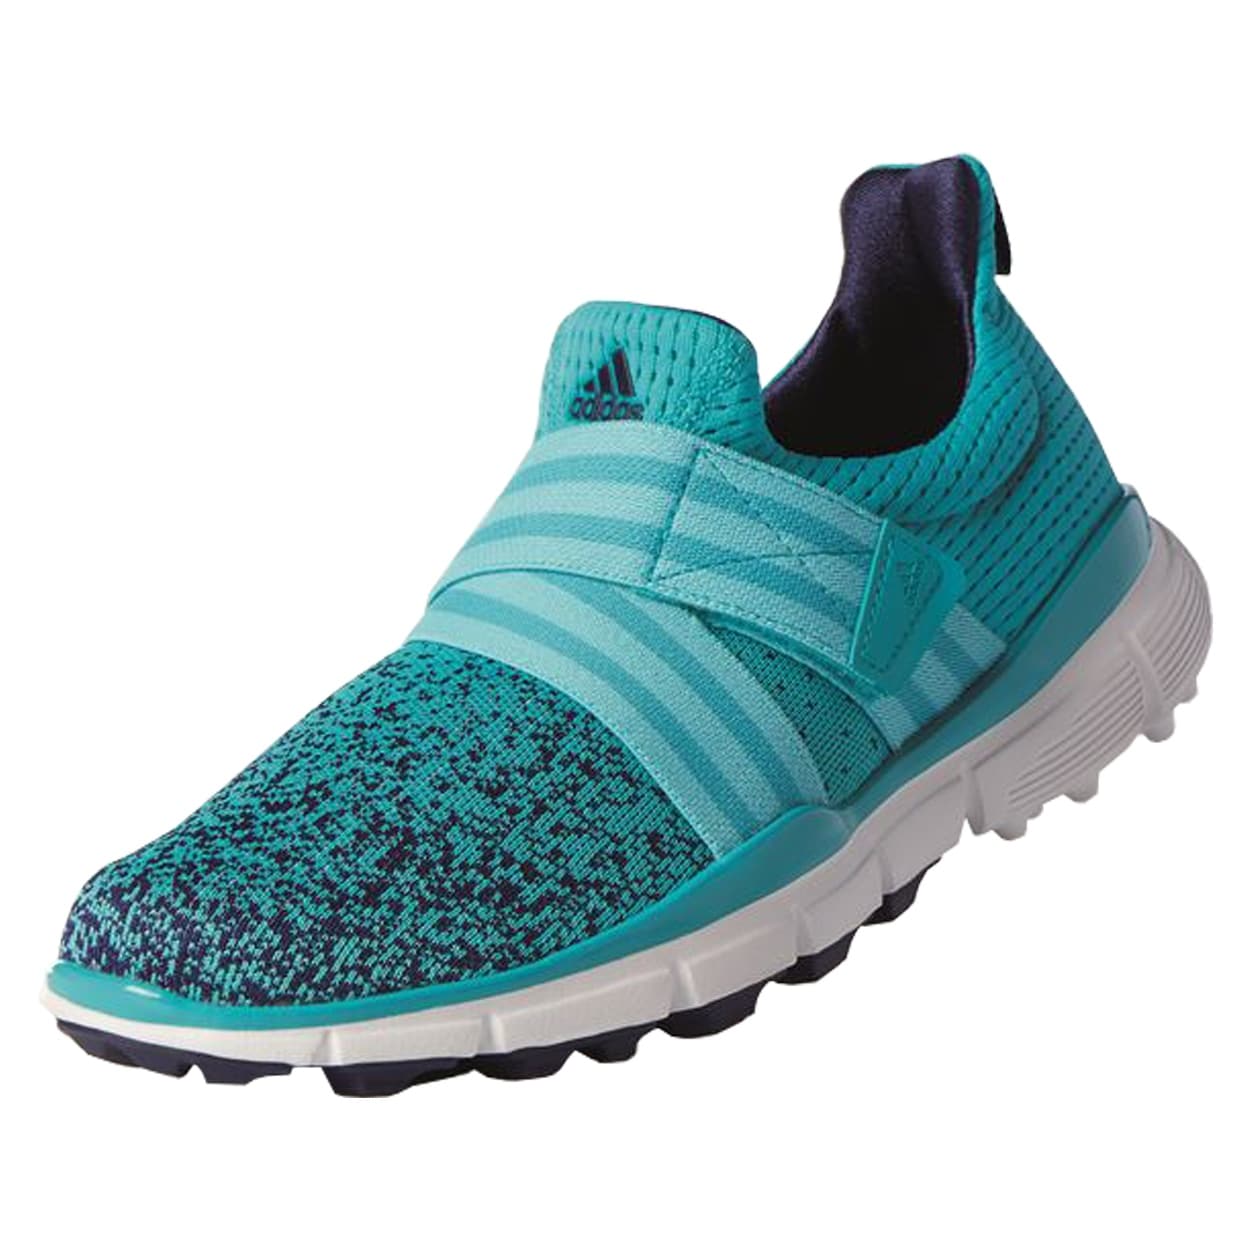 climacool knit shoes